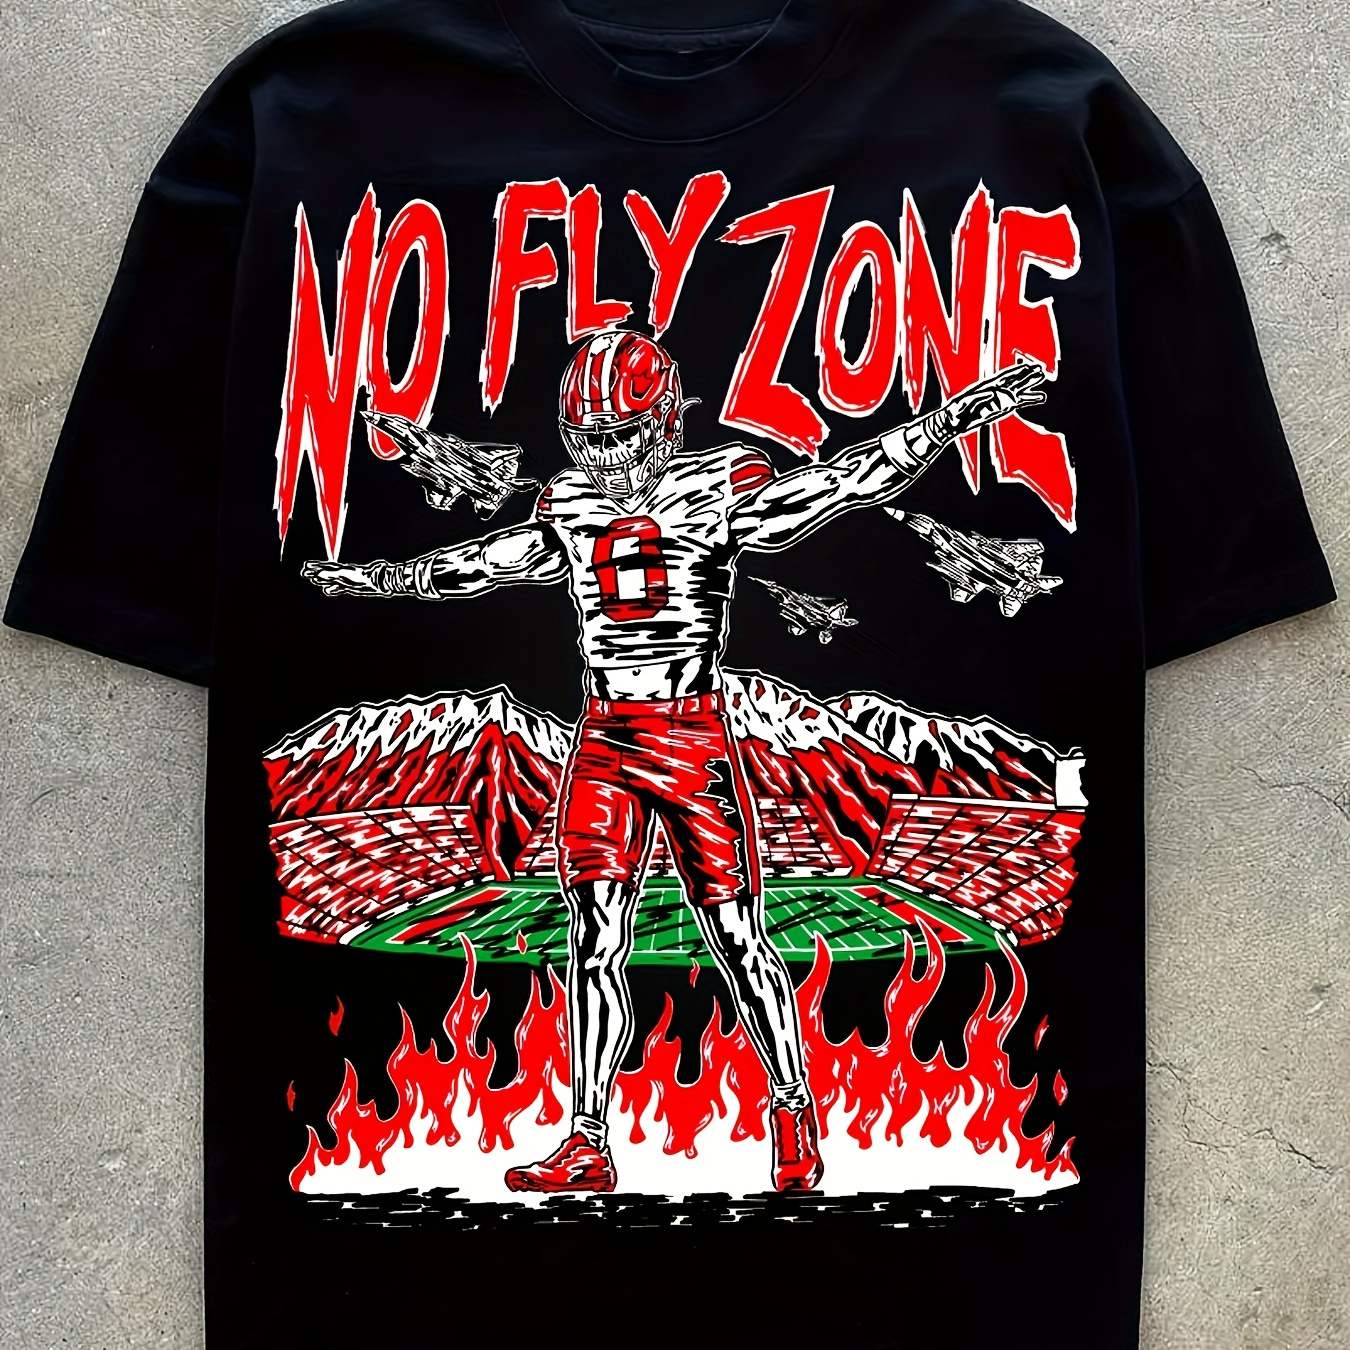 

Men's No Fly Zone Graphic Short Sleeve T-shirt, Comfy Stretchy Trendy Tees For Summer, Casual Daily Style Fashion Clothing